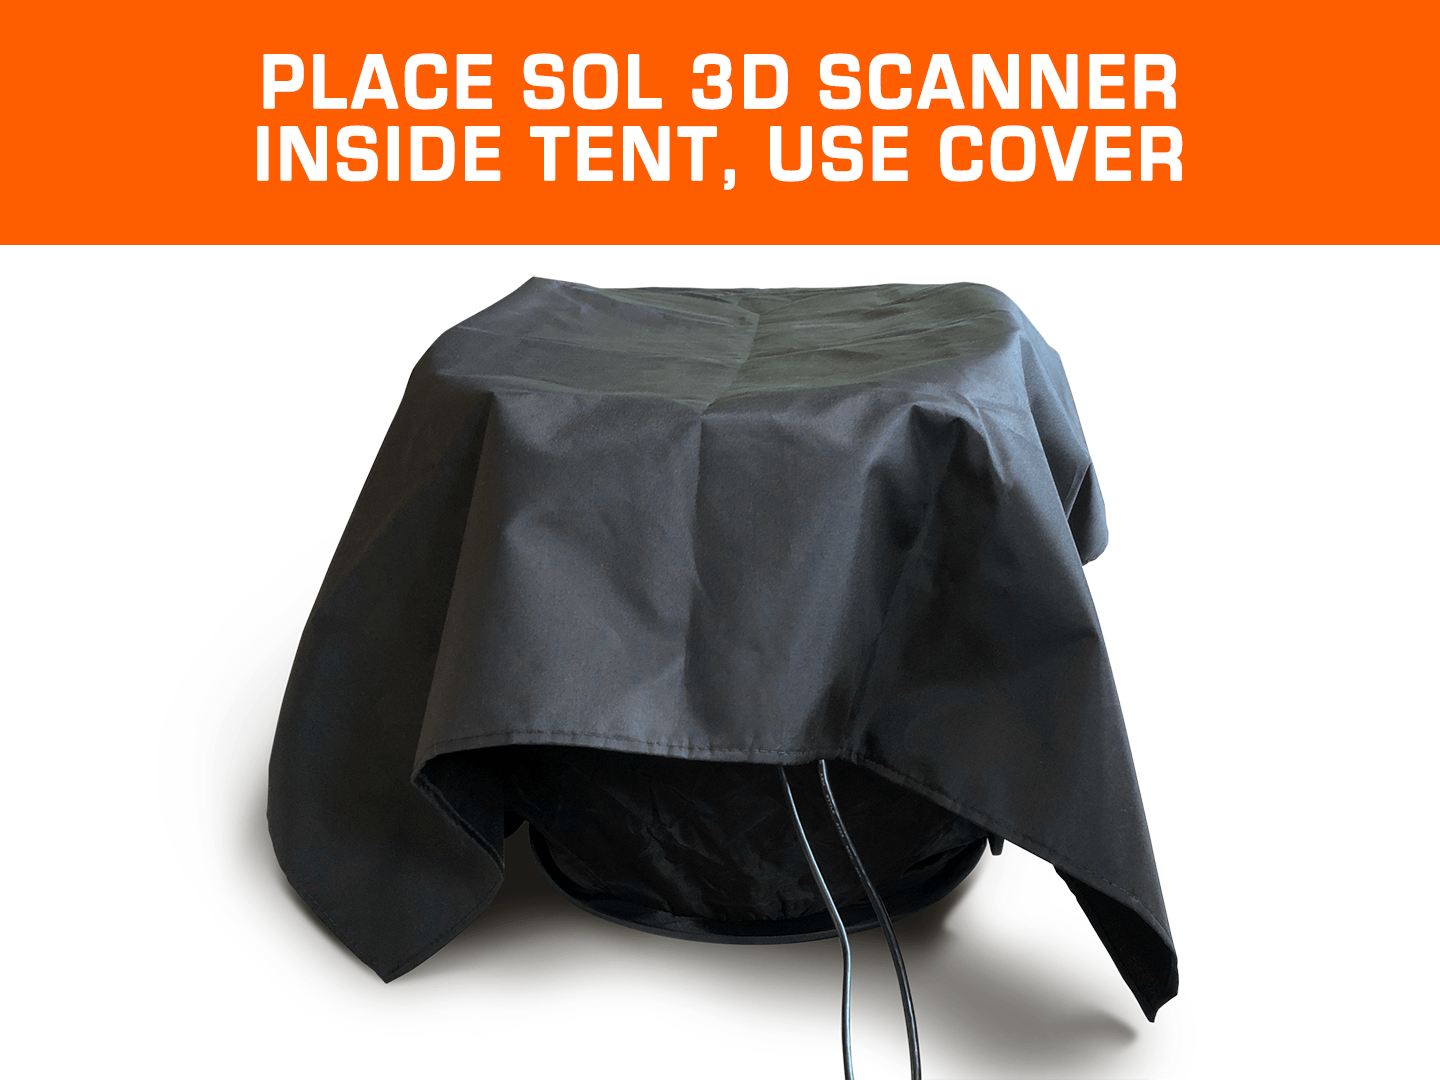 Place SOL 3D scanner inside tent and use cover to keep out light